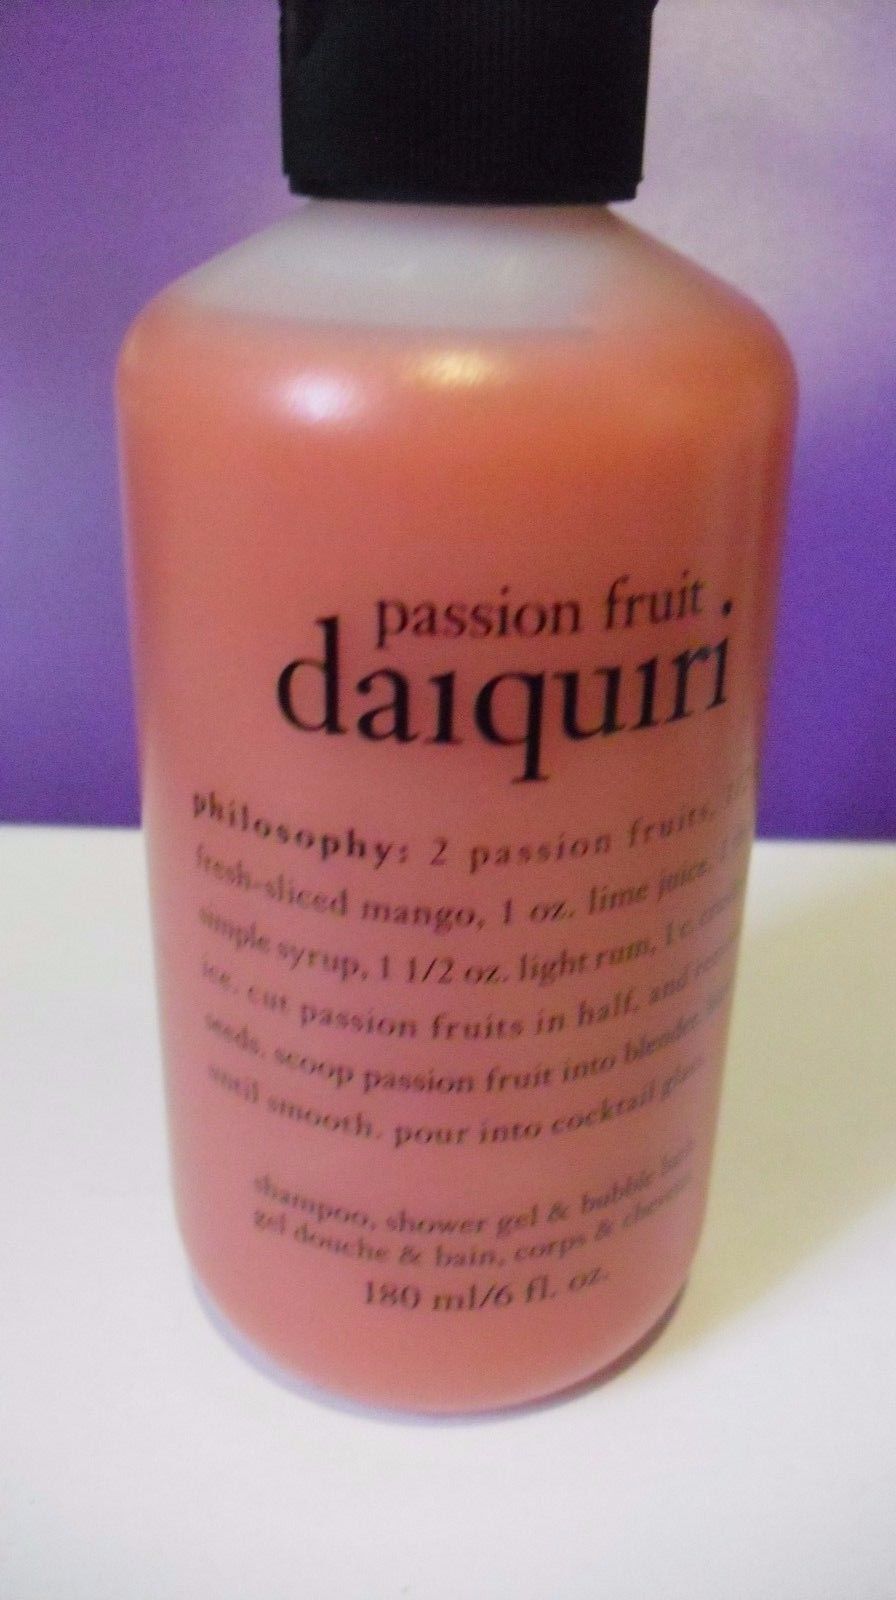 Primary image for Philosophy Passion Fruit Daiquiri 6 oz 3-in-1 Shampoo Shower Gel & Bath